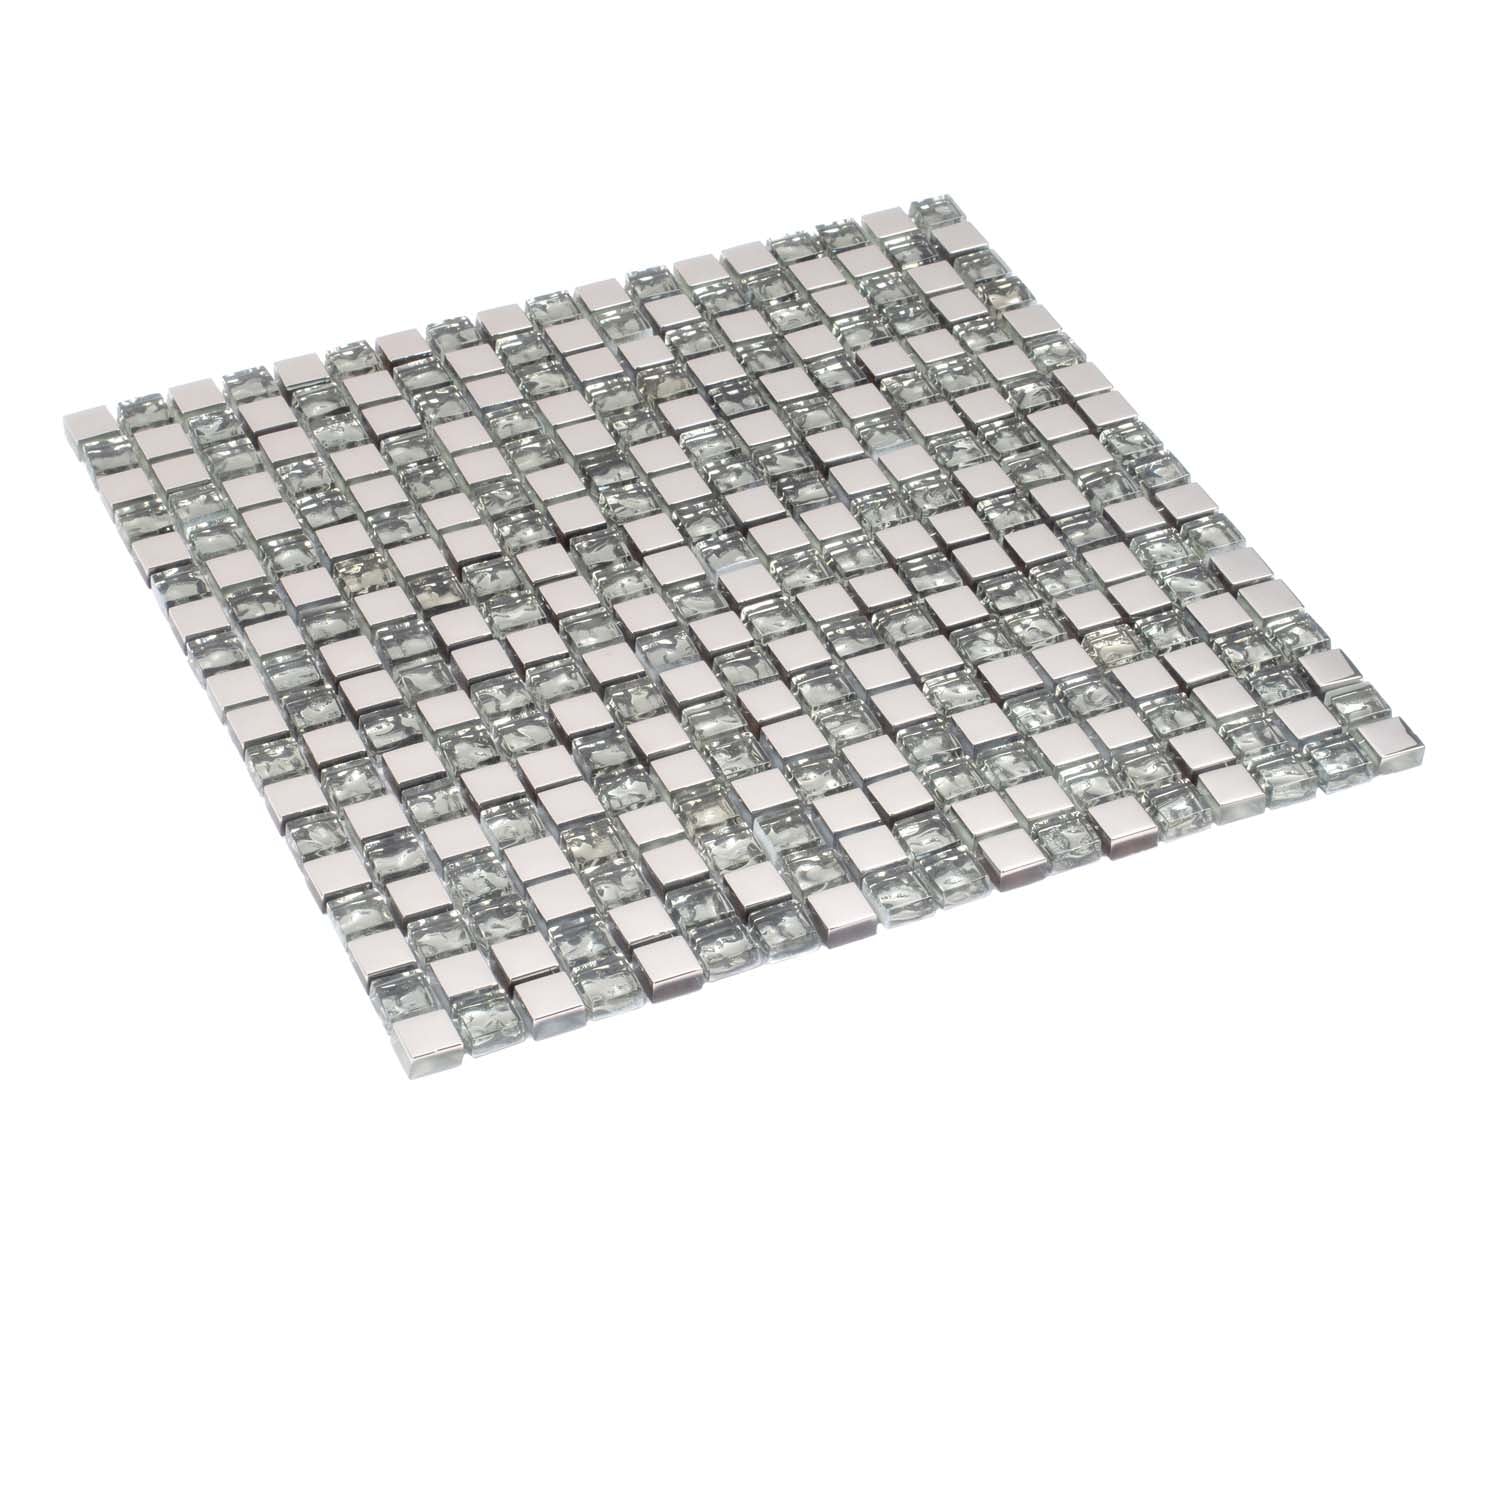 Silver and Gray Tile